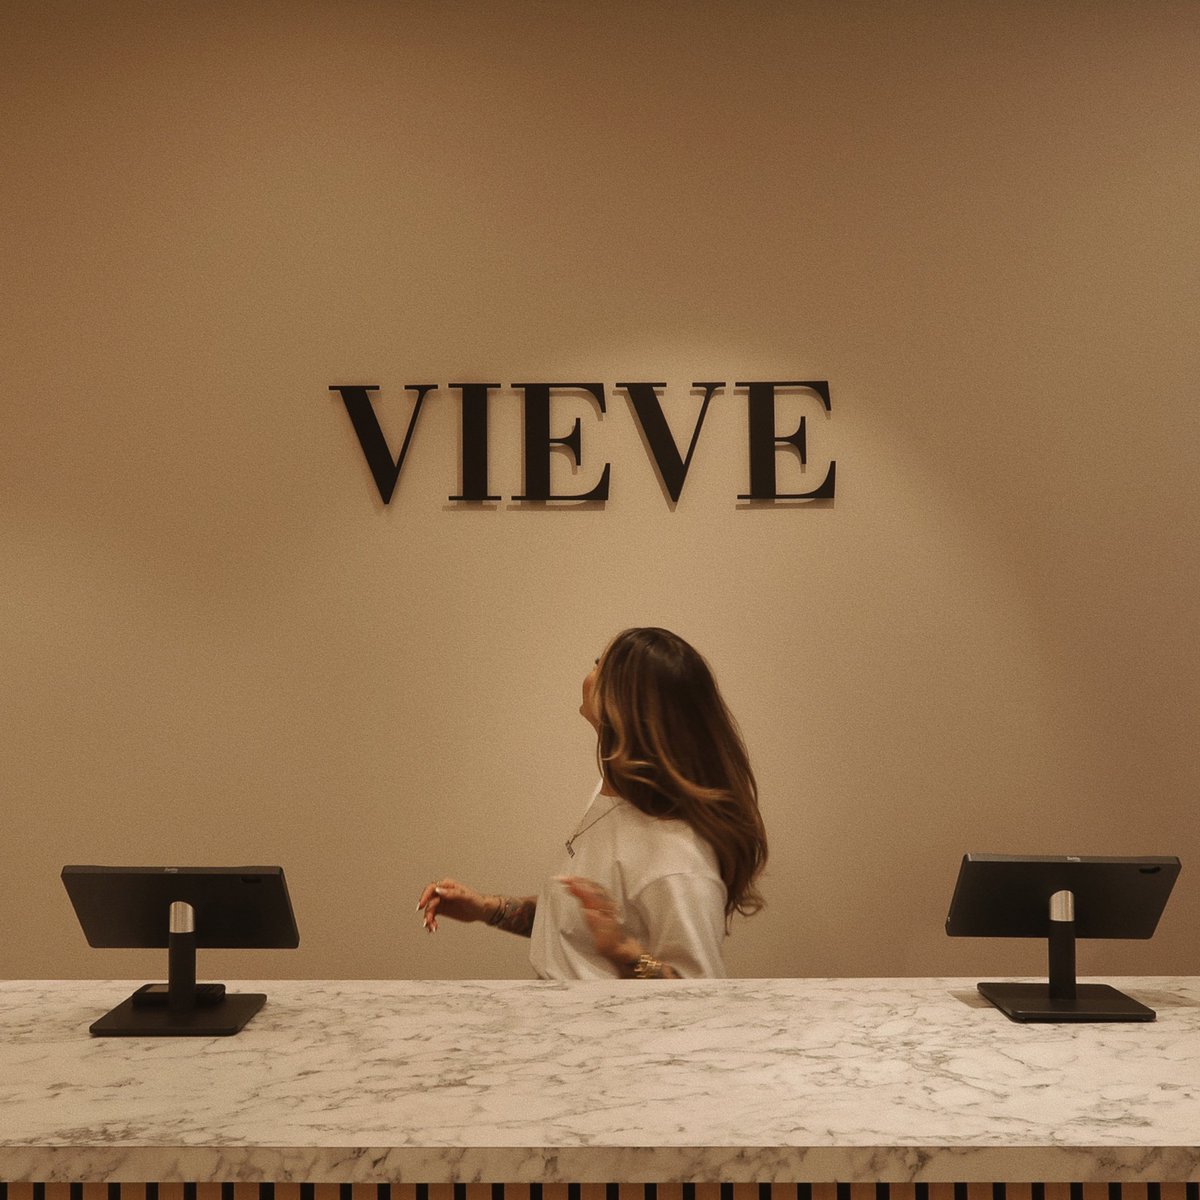 Calling all GlasVIEVEgians and beyond... we are OPEN! Come visit At Home with VIEVE in Princes Square from today until December 22nd. Discover more via the link in bio. #VIEVE